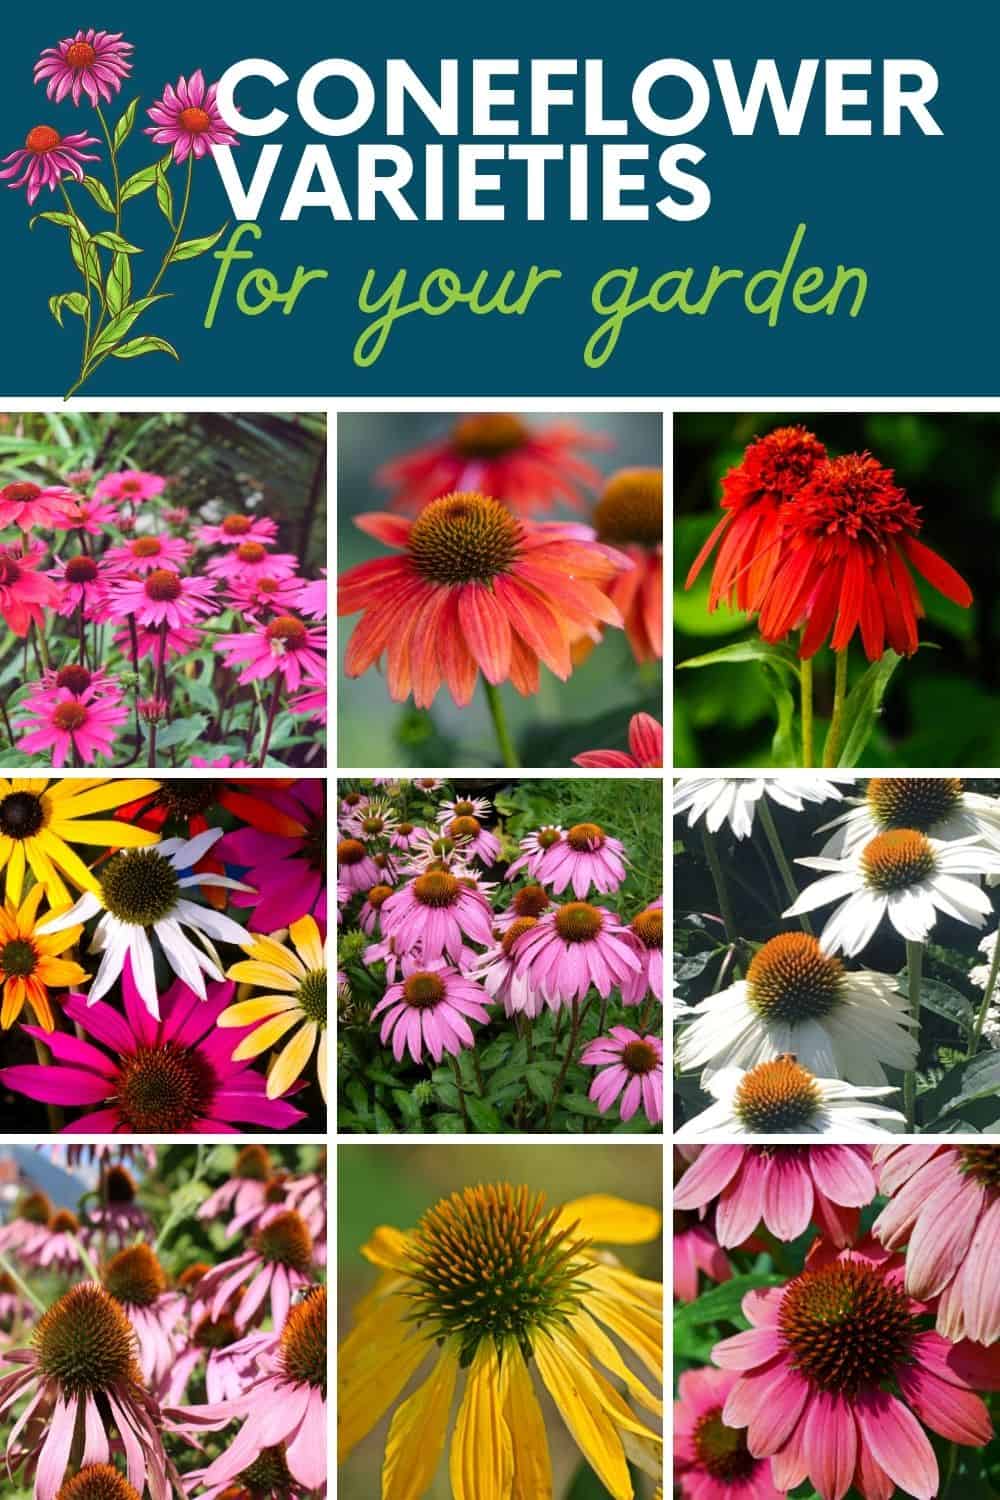 13 Coneflower Varieties (Echinacea) to Plant This Year - Growfully